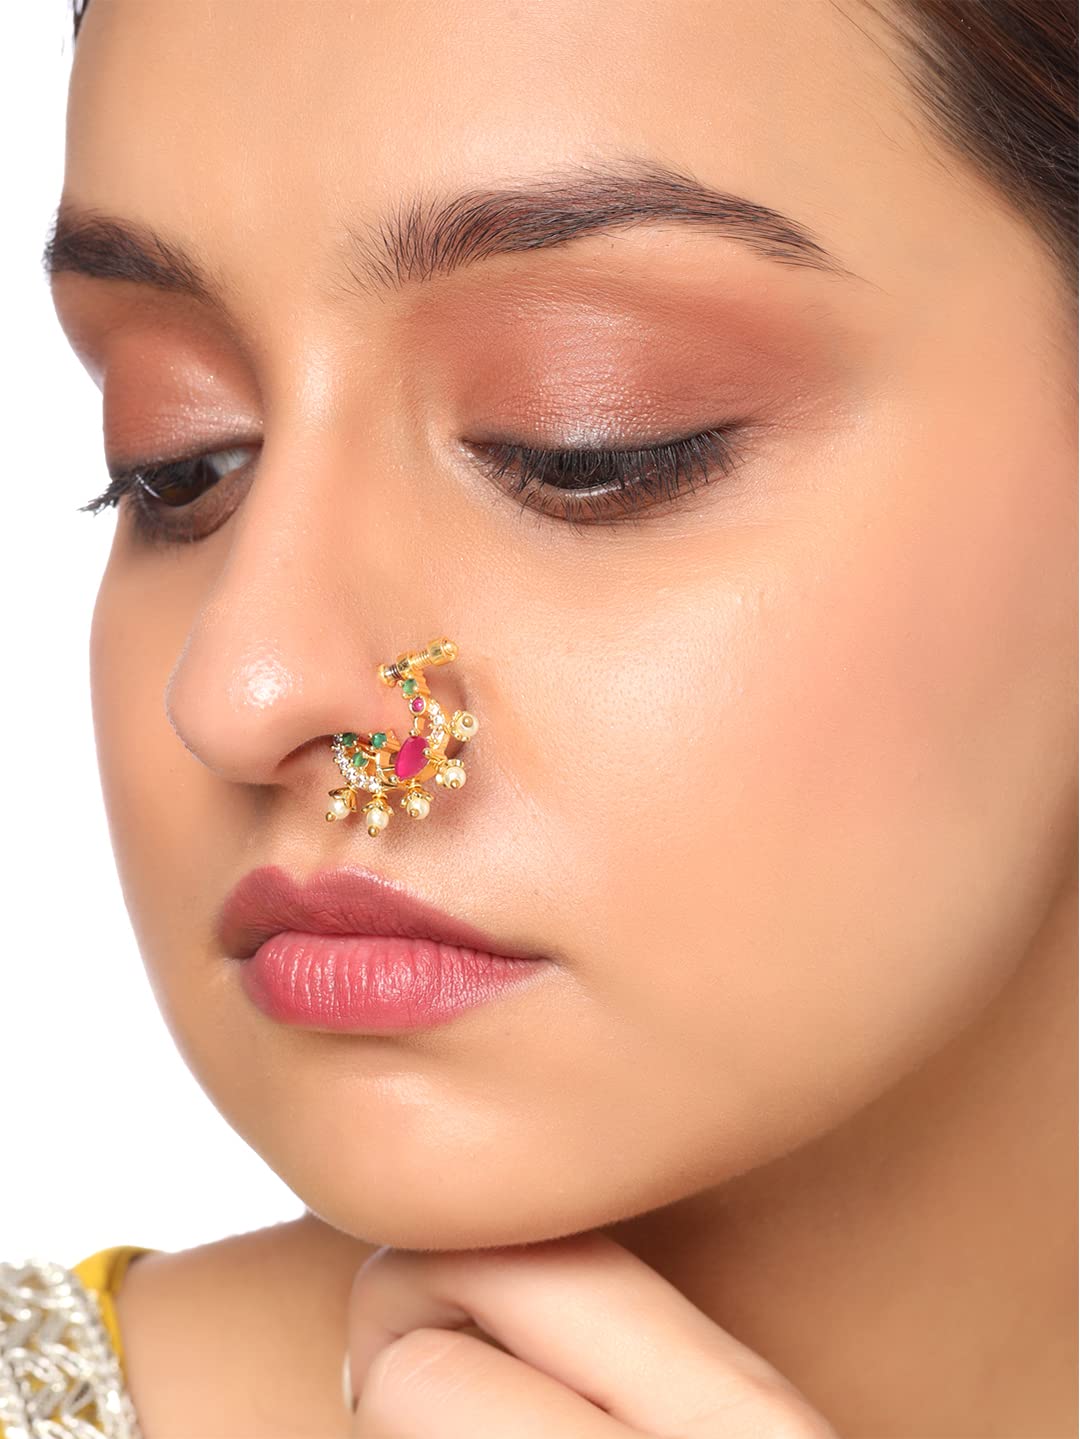 Amazon.com: Gold Clip on Double Nose Piercing Hoop - Hypoallergenic Tiny  Handmade 20 gauge Faux Spiral Nose Ring - 14k Gold 7mm No Piercing Needed  Fake Double Nose Hoop : Handmade Products